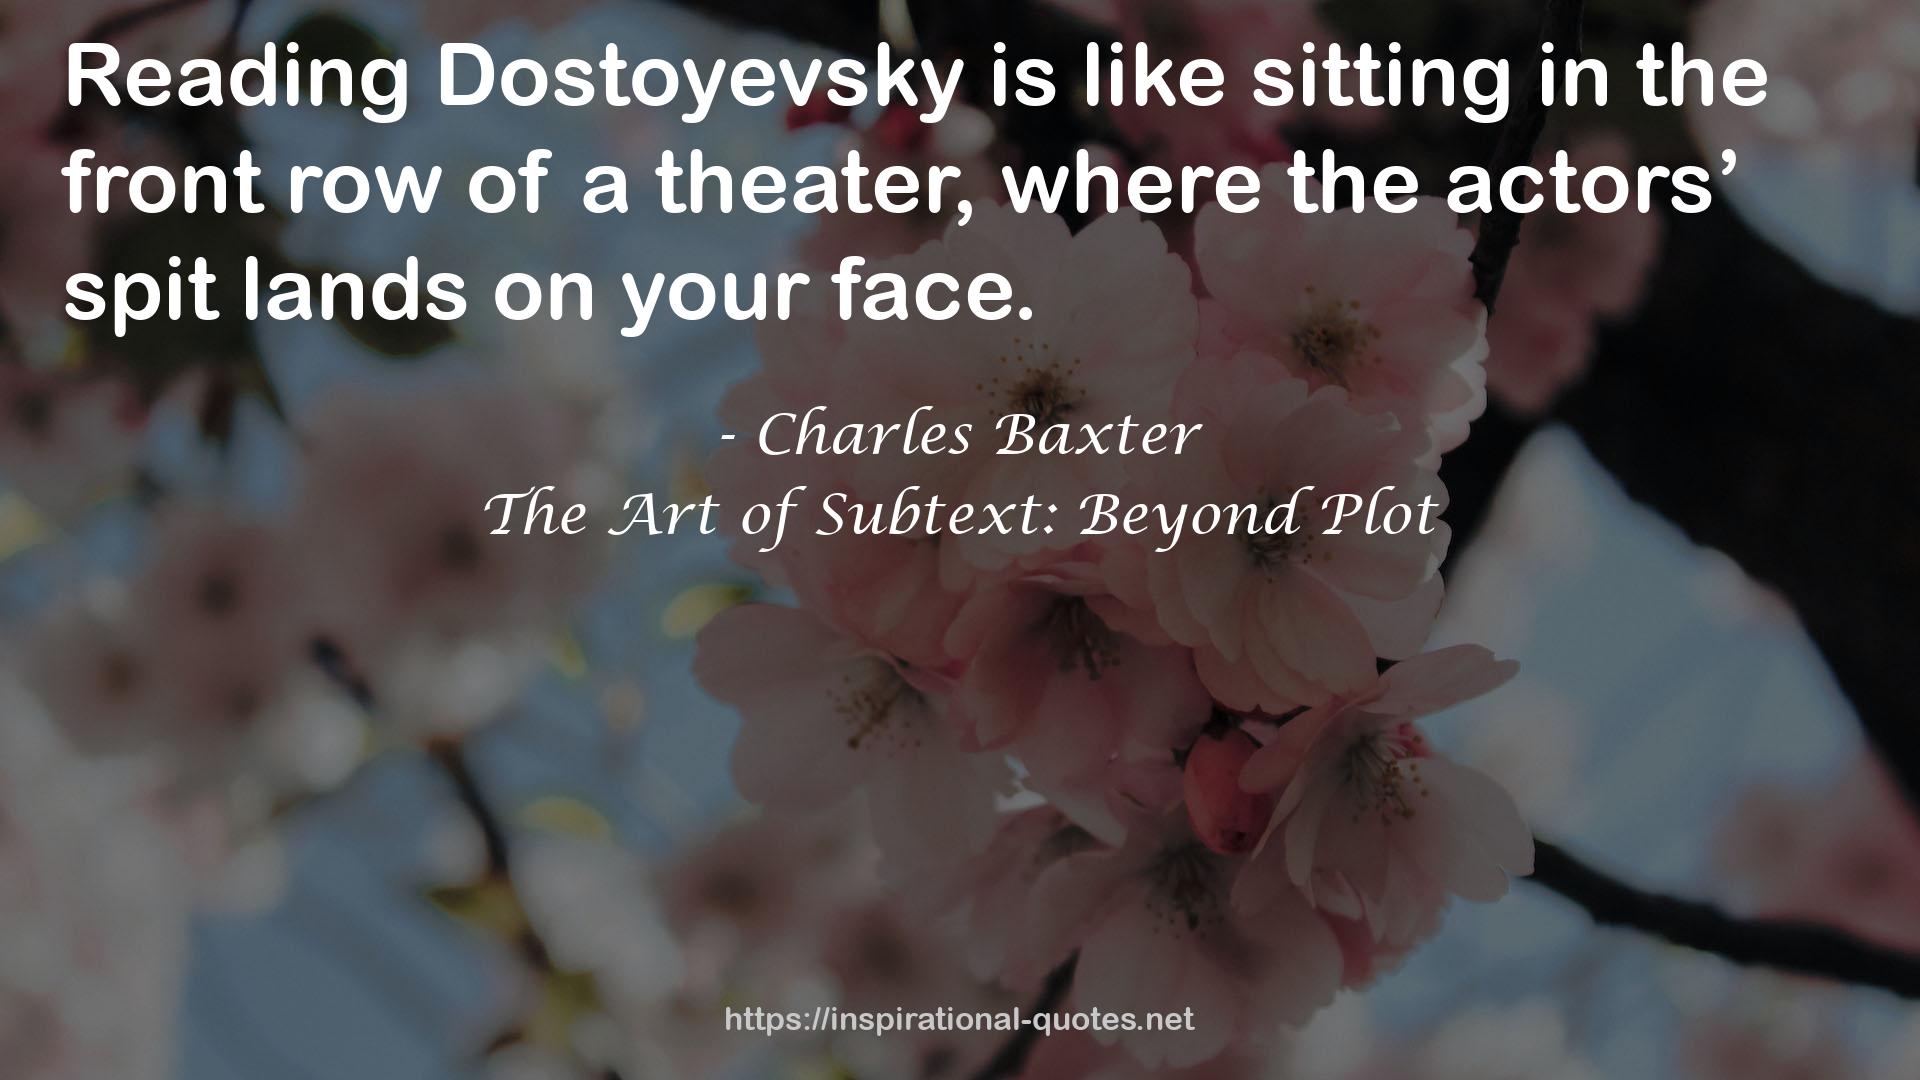 The Art of Subtext: Beyond Plot QUOTES